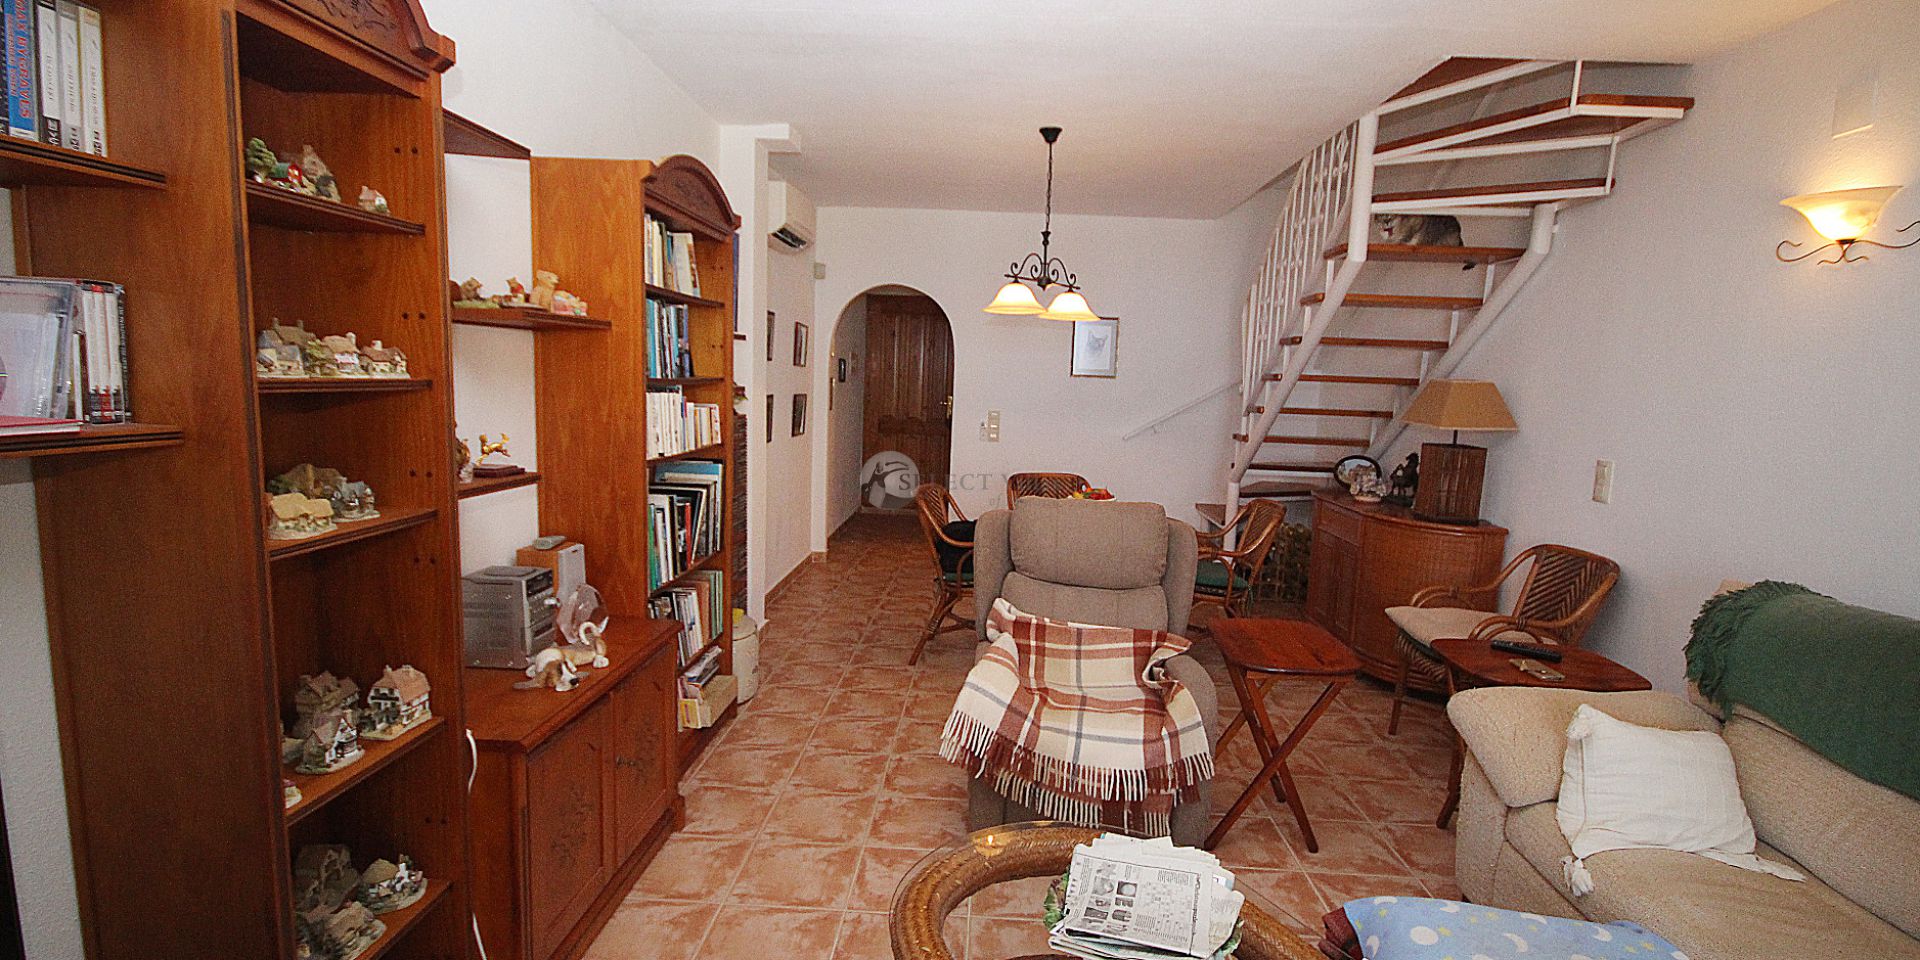 Townhouse with pool for sale in Benitachell, Spain